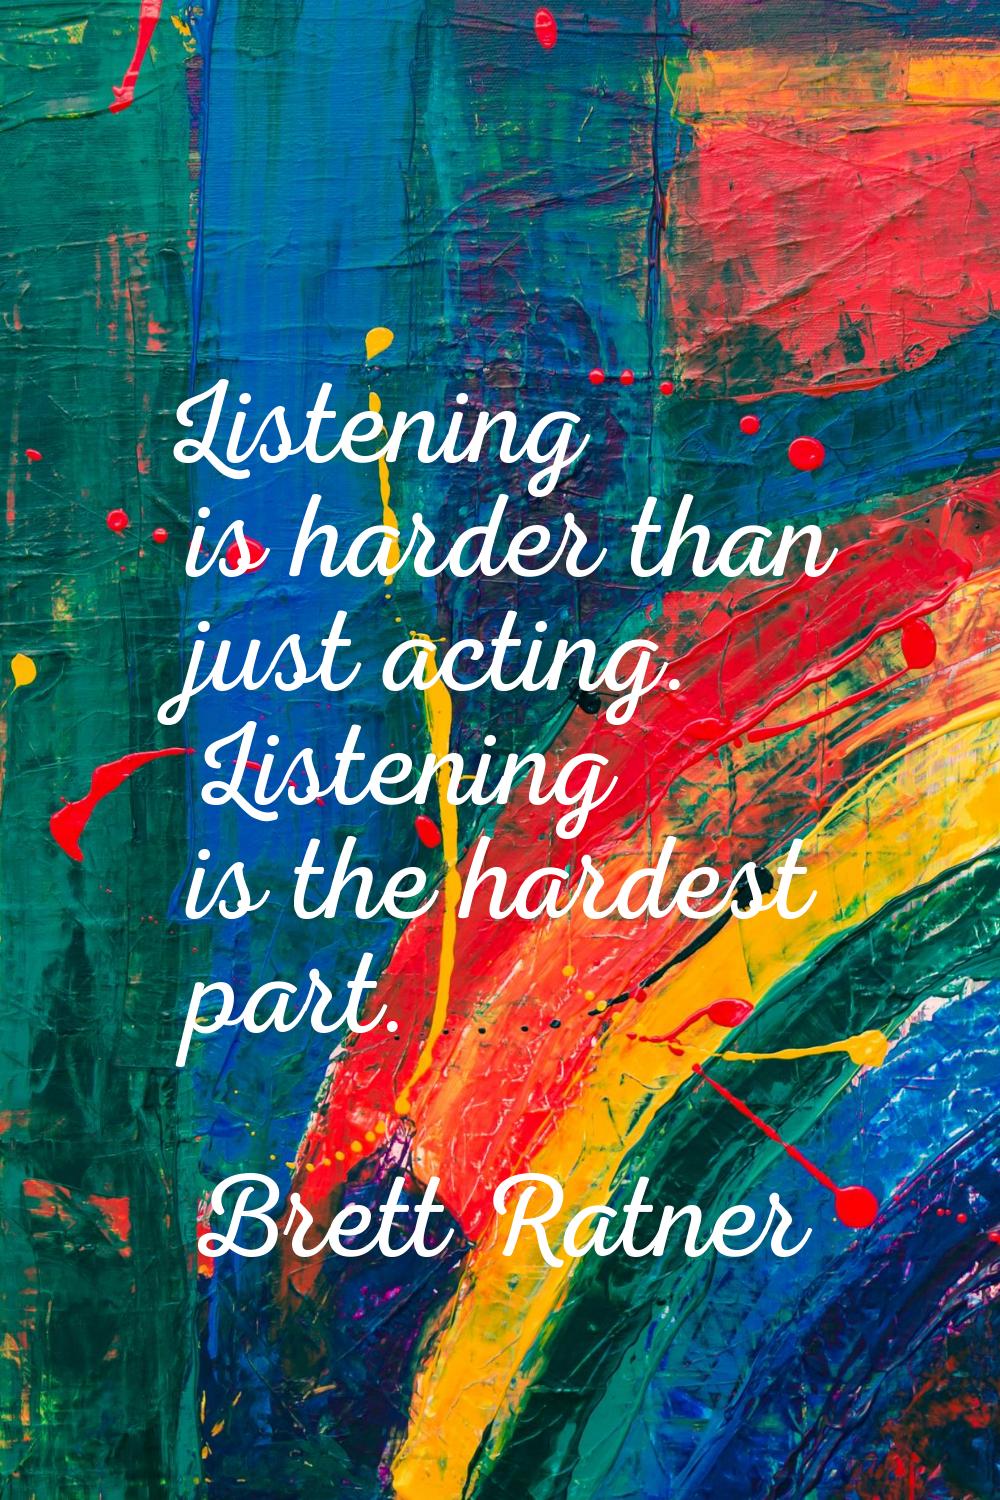 Listening is harder than just acting. Listening is the hardest part.